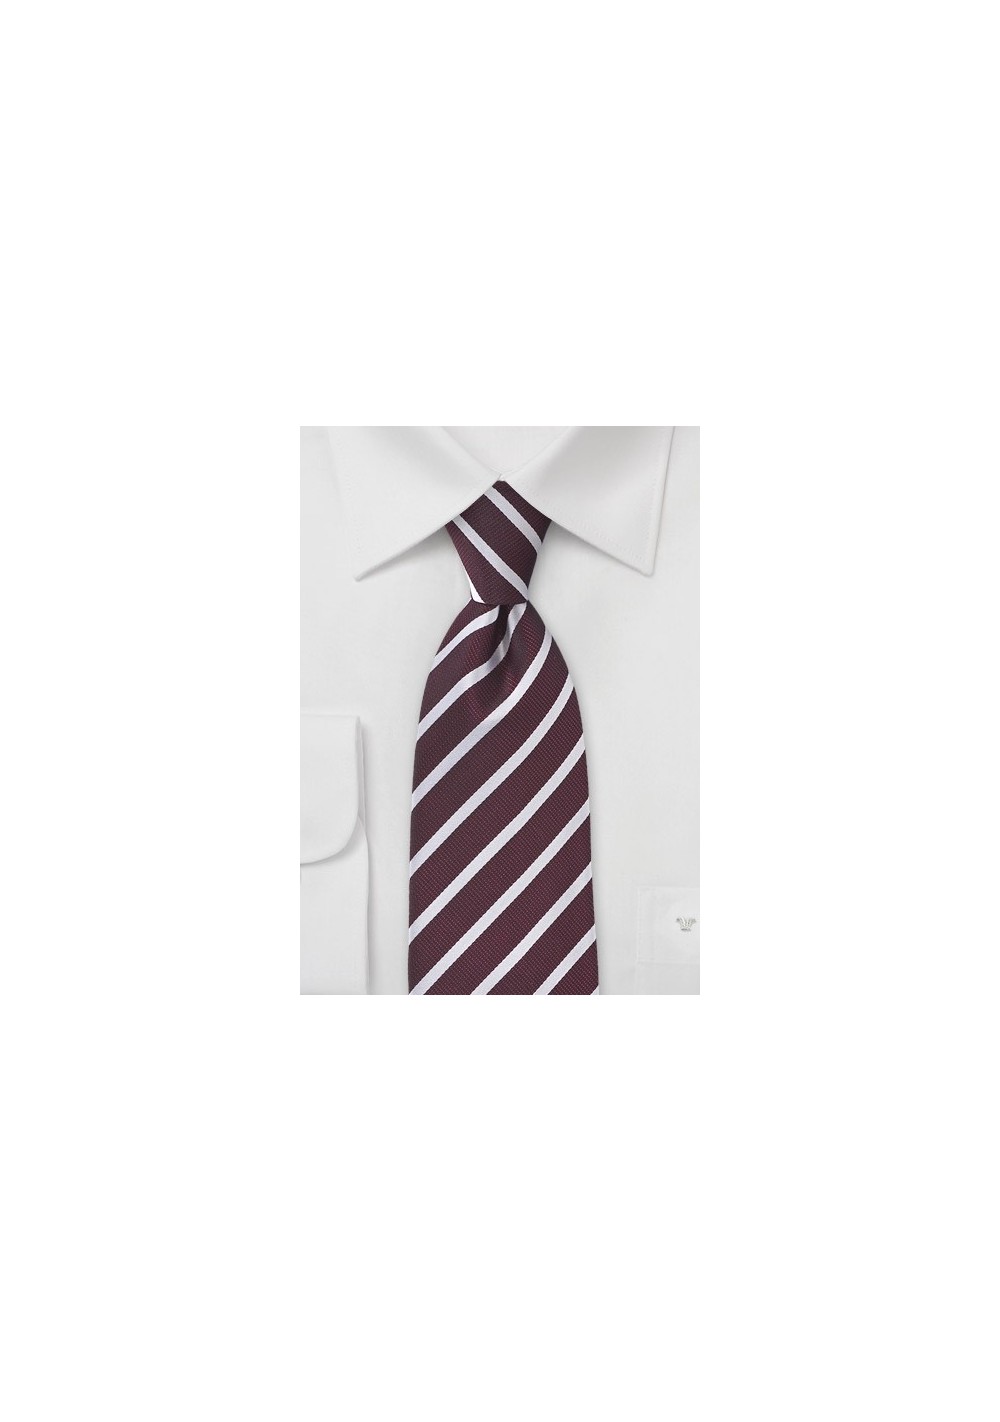 Crimson Red Tie with Light Silver Stripes